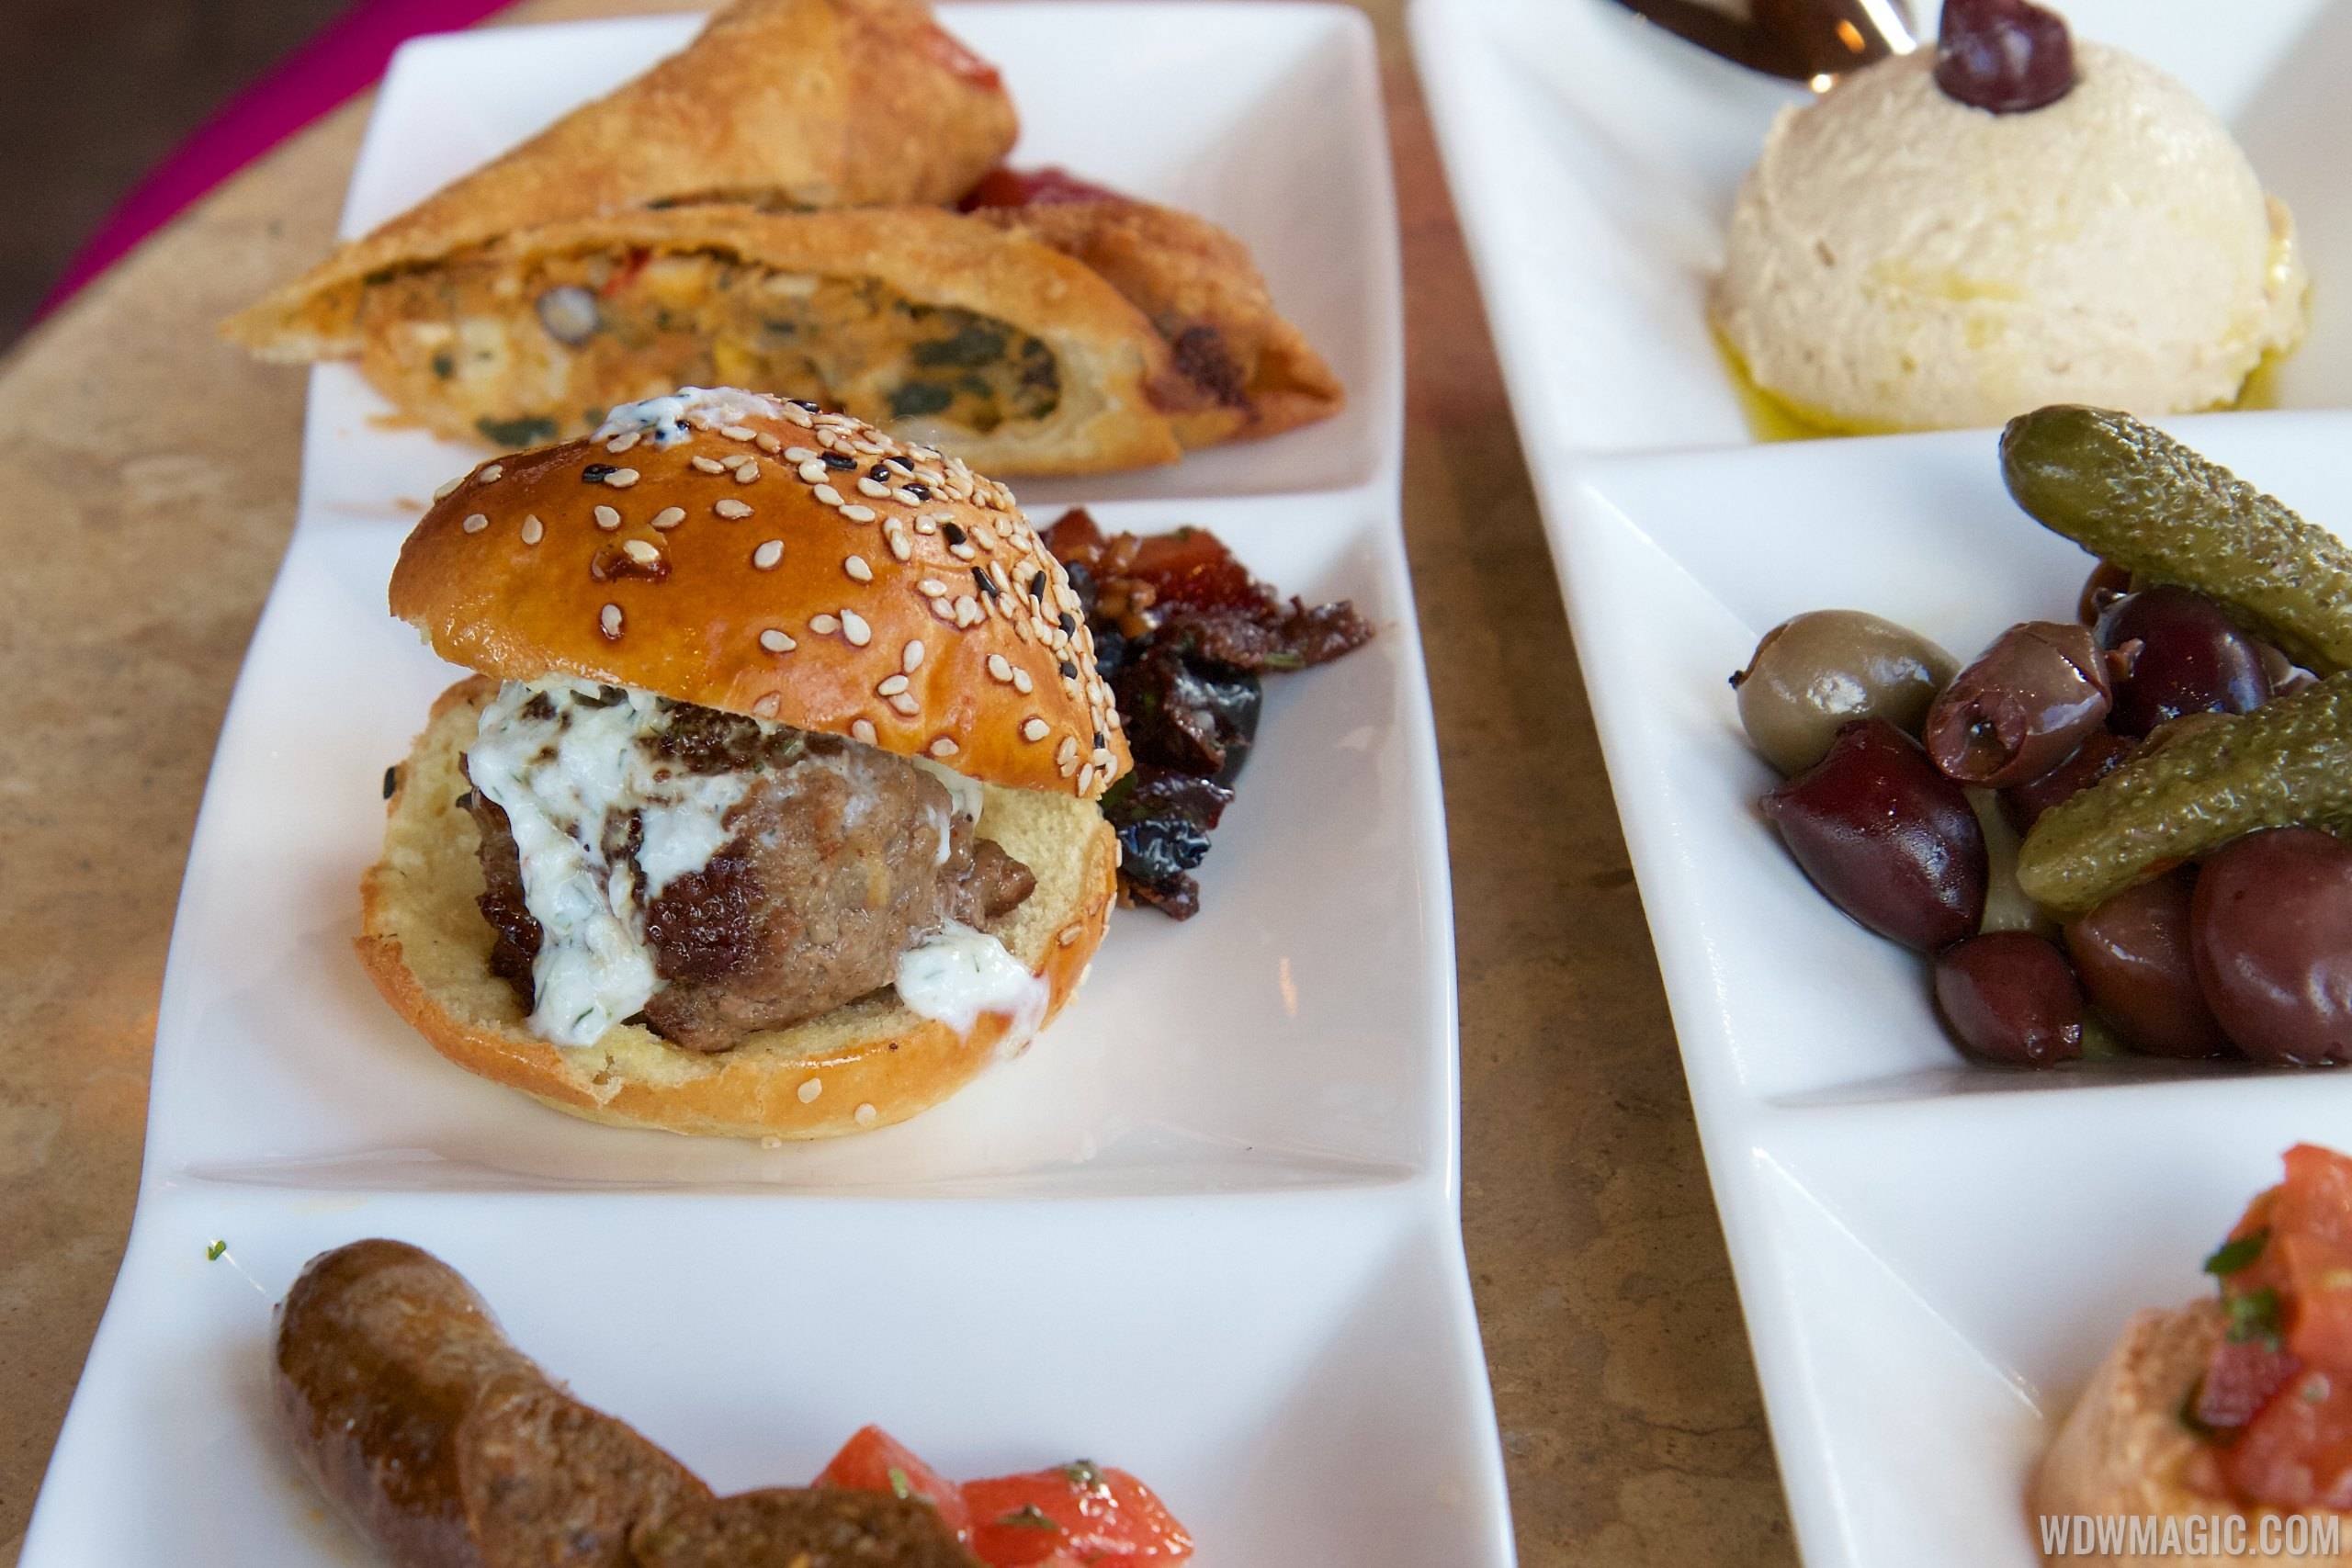 Spice Road Table - Lamb Slider from the Tingis Sampler $16